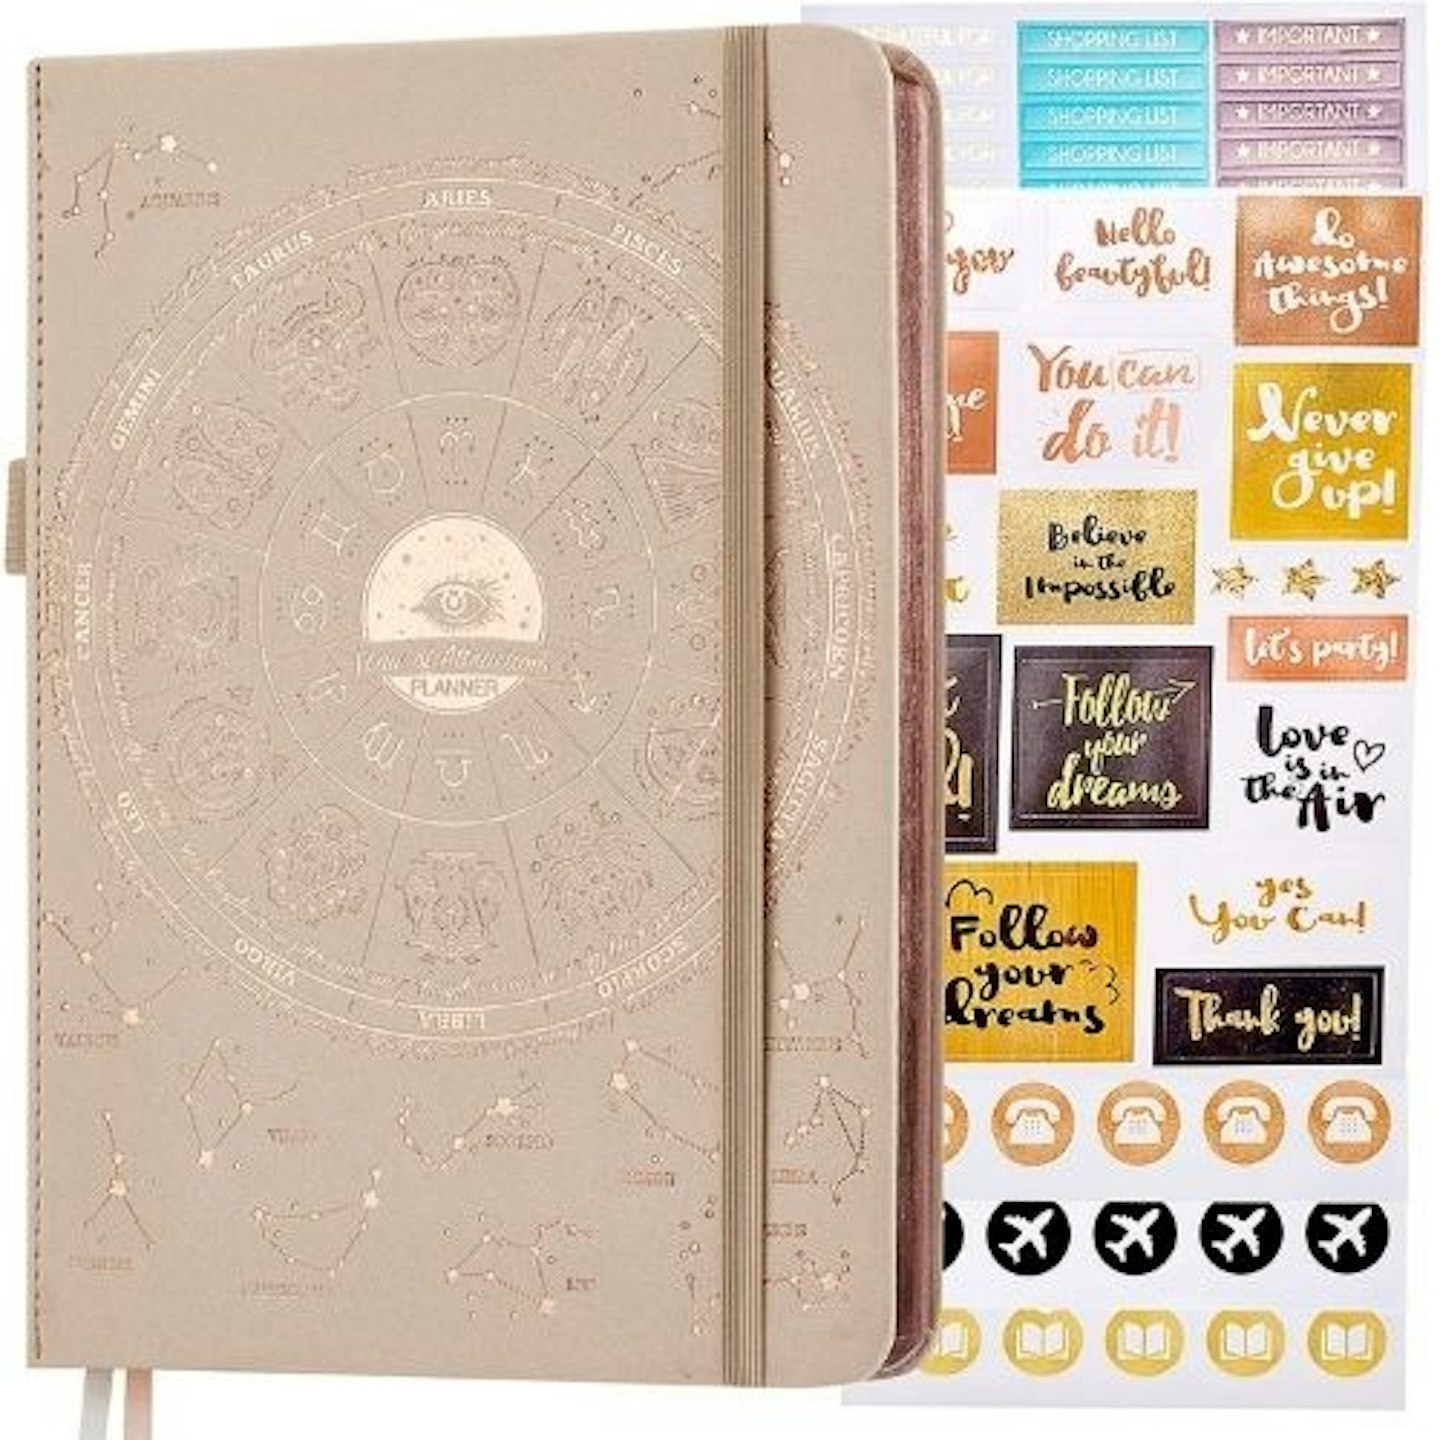 deluxe law of attraction life and goal planner